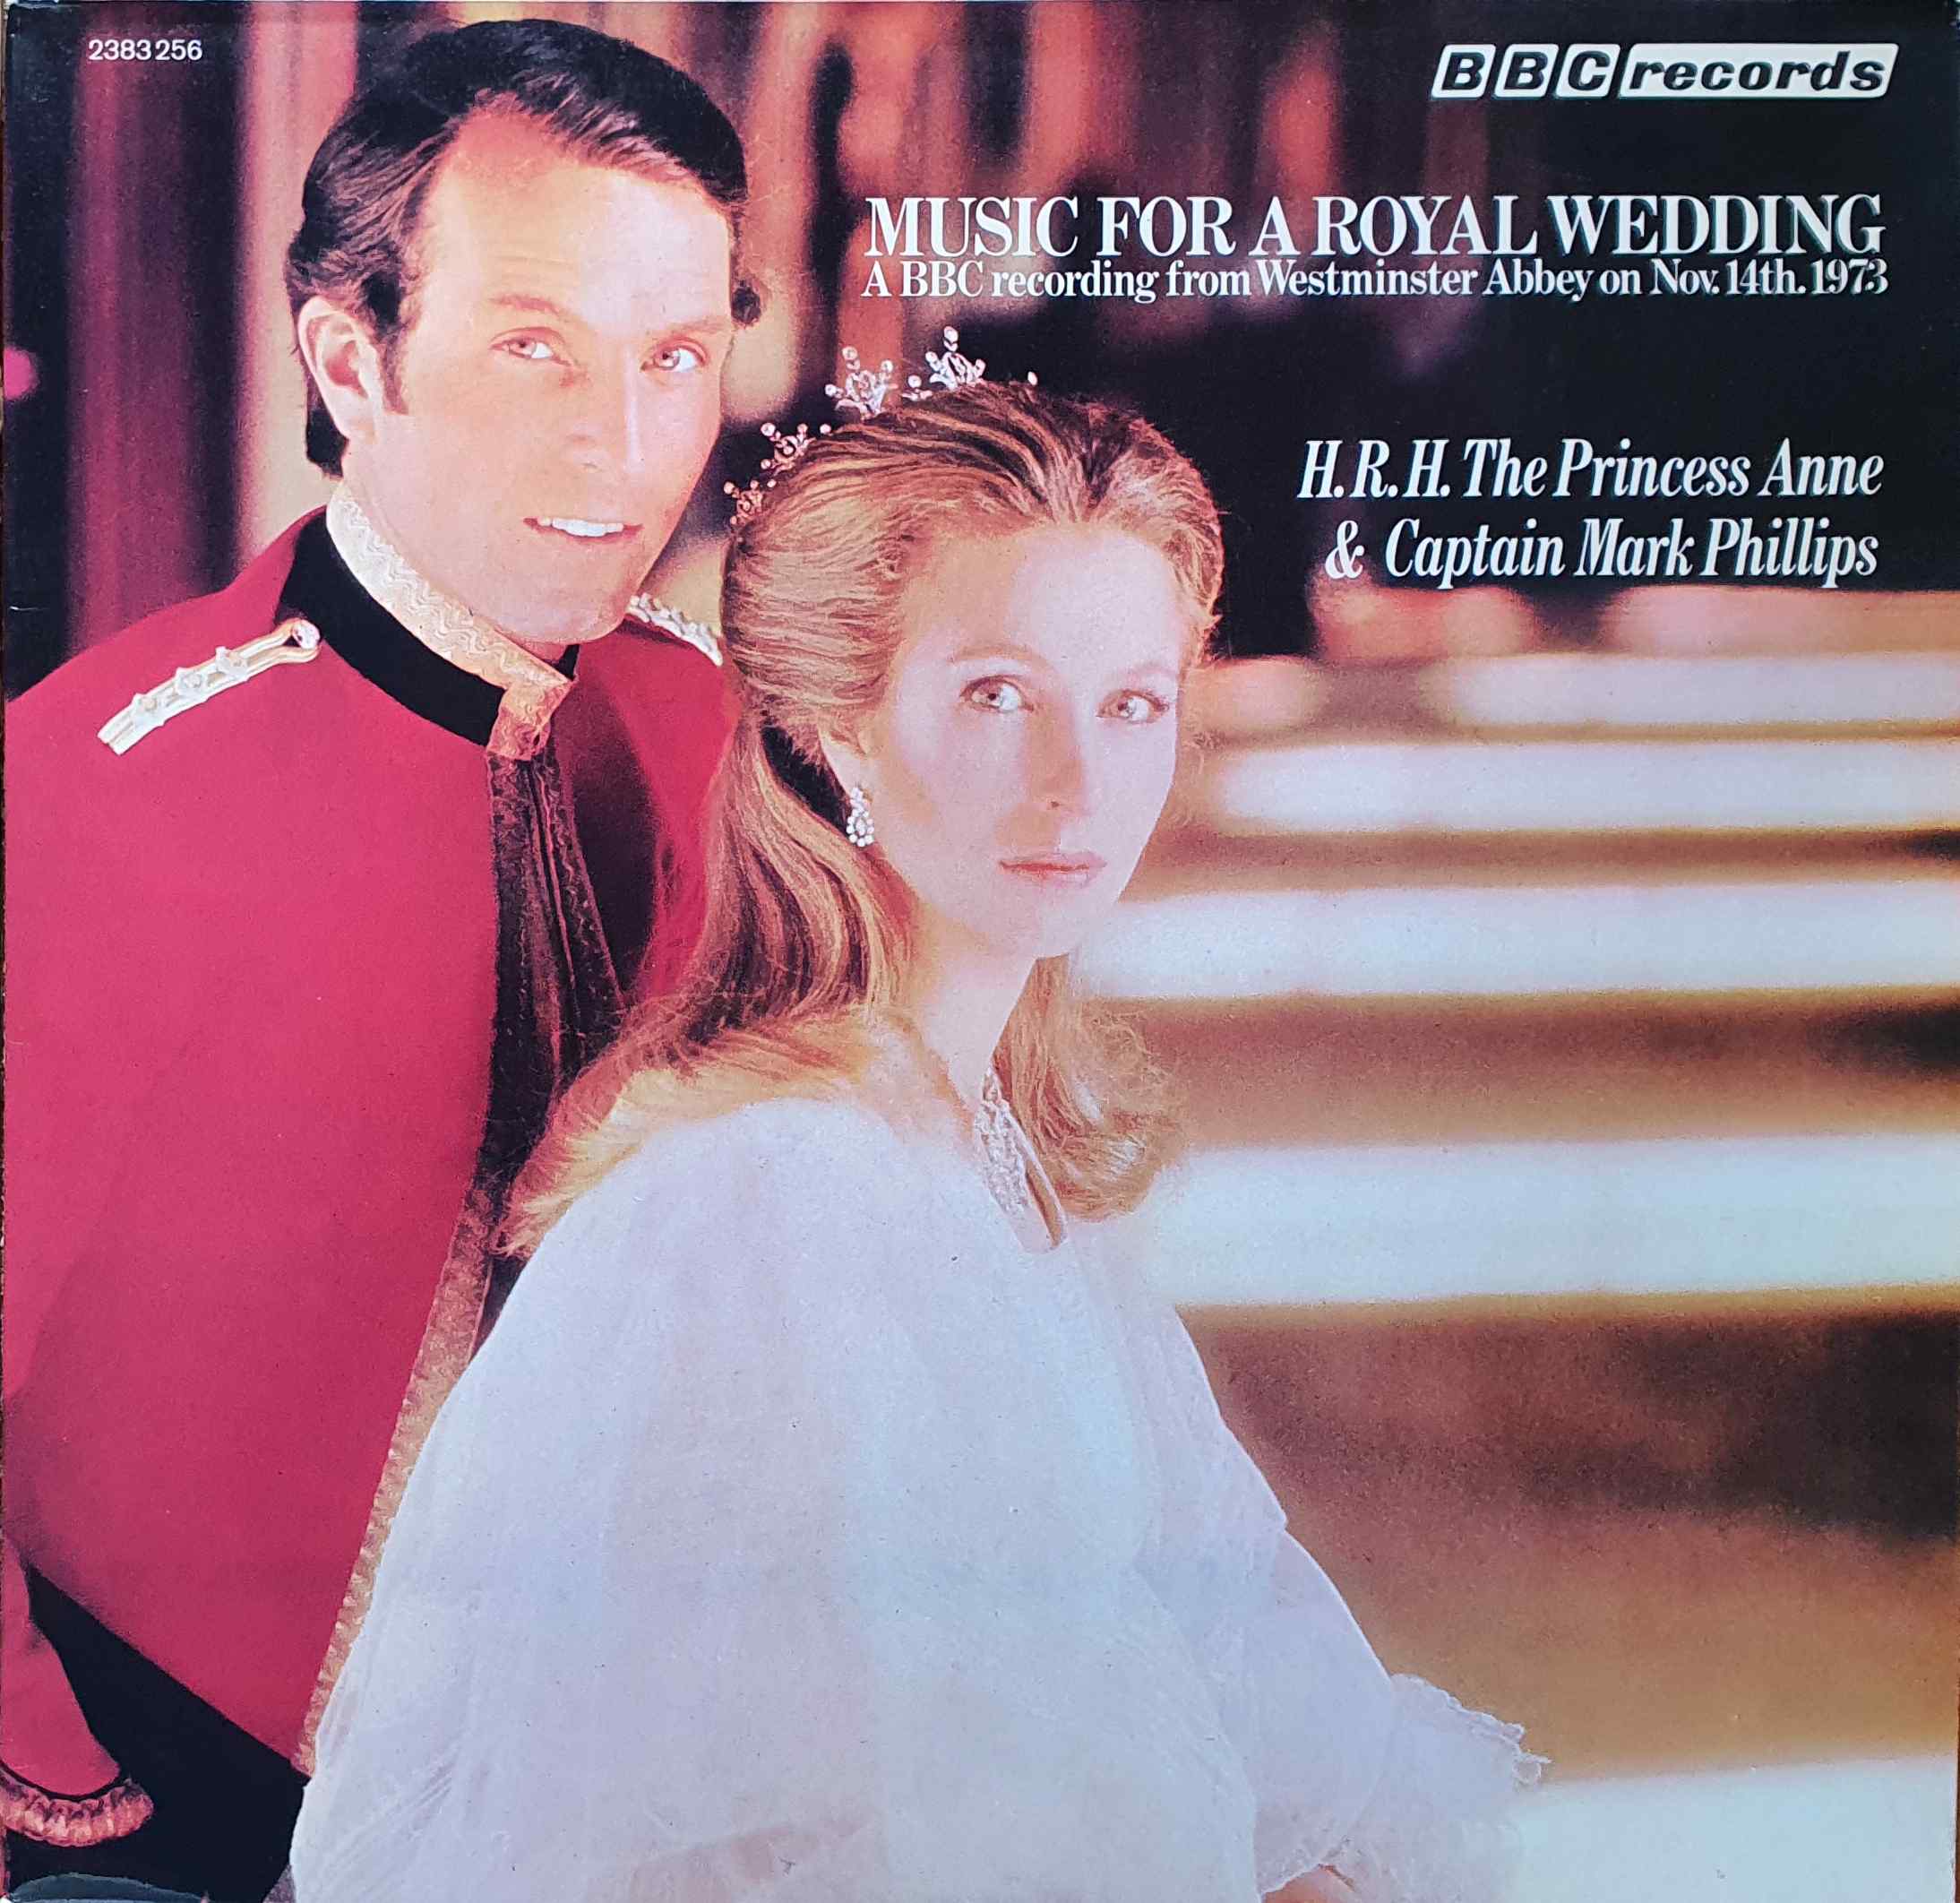 Picture of Music for a Royal wedding by artist Various from the BBC albums - Records and Tapes library